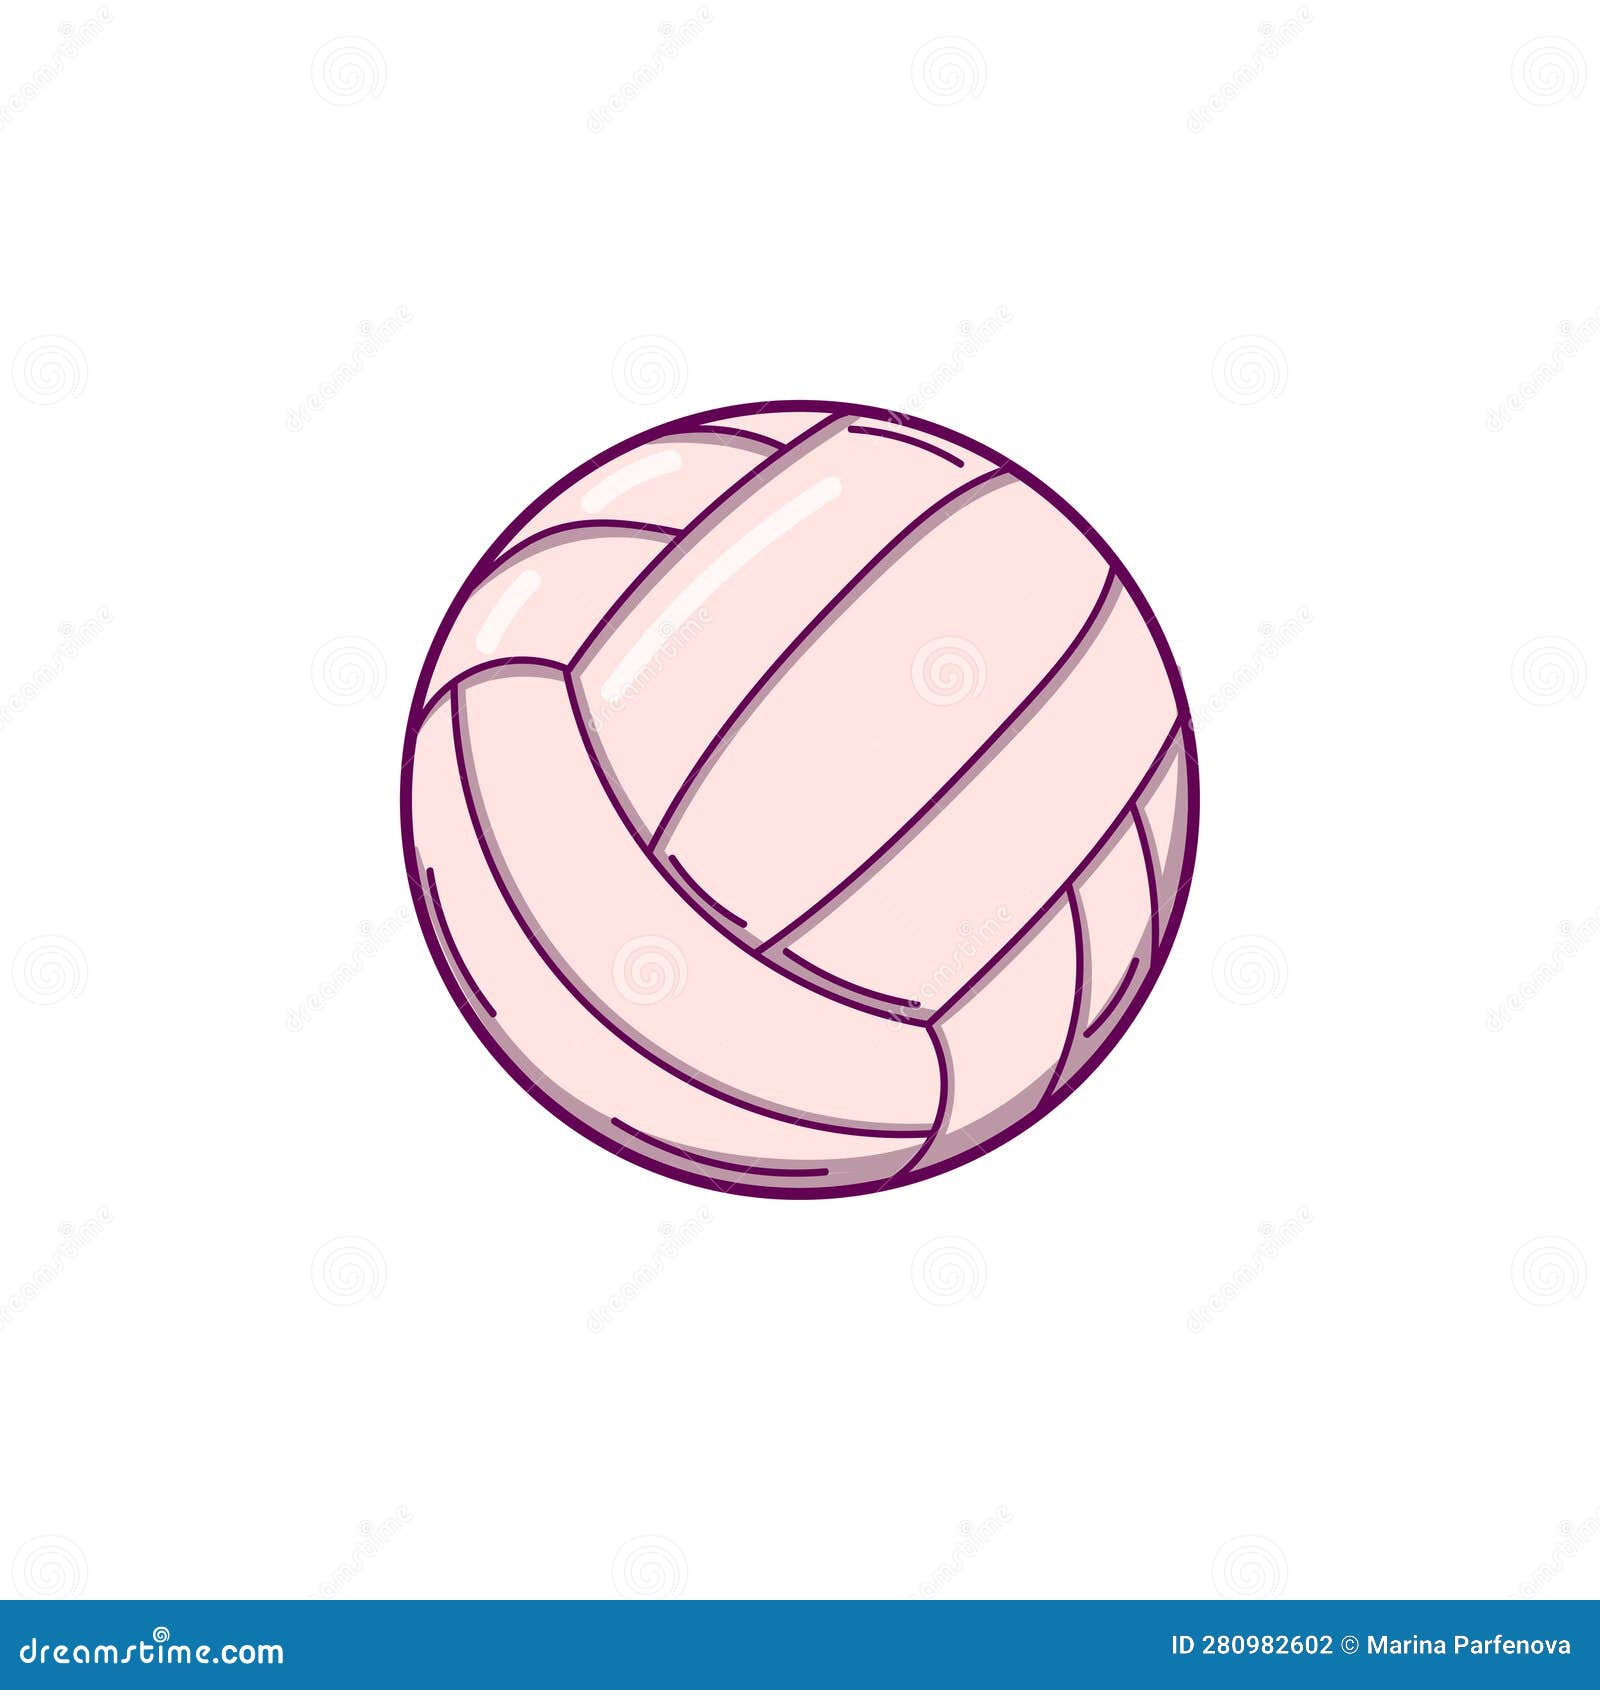 Hand Drawn Volleyball Ball in Doodle Style Isolated on White Background ...